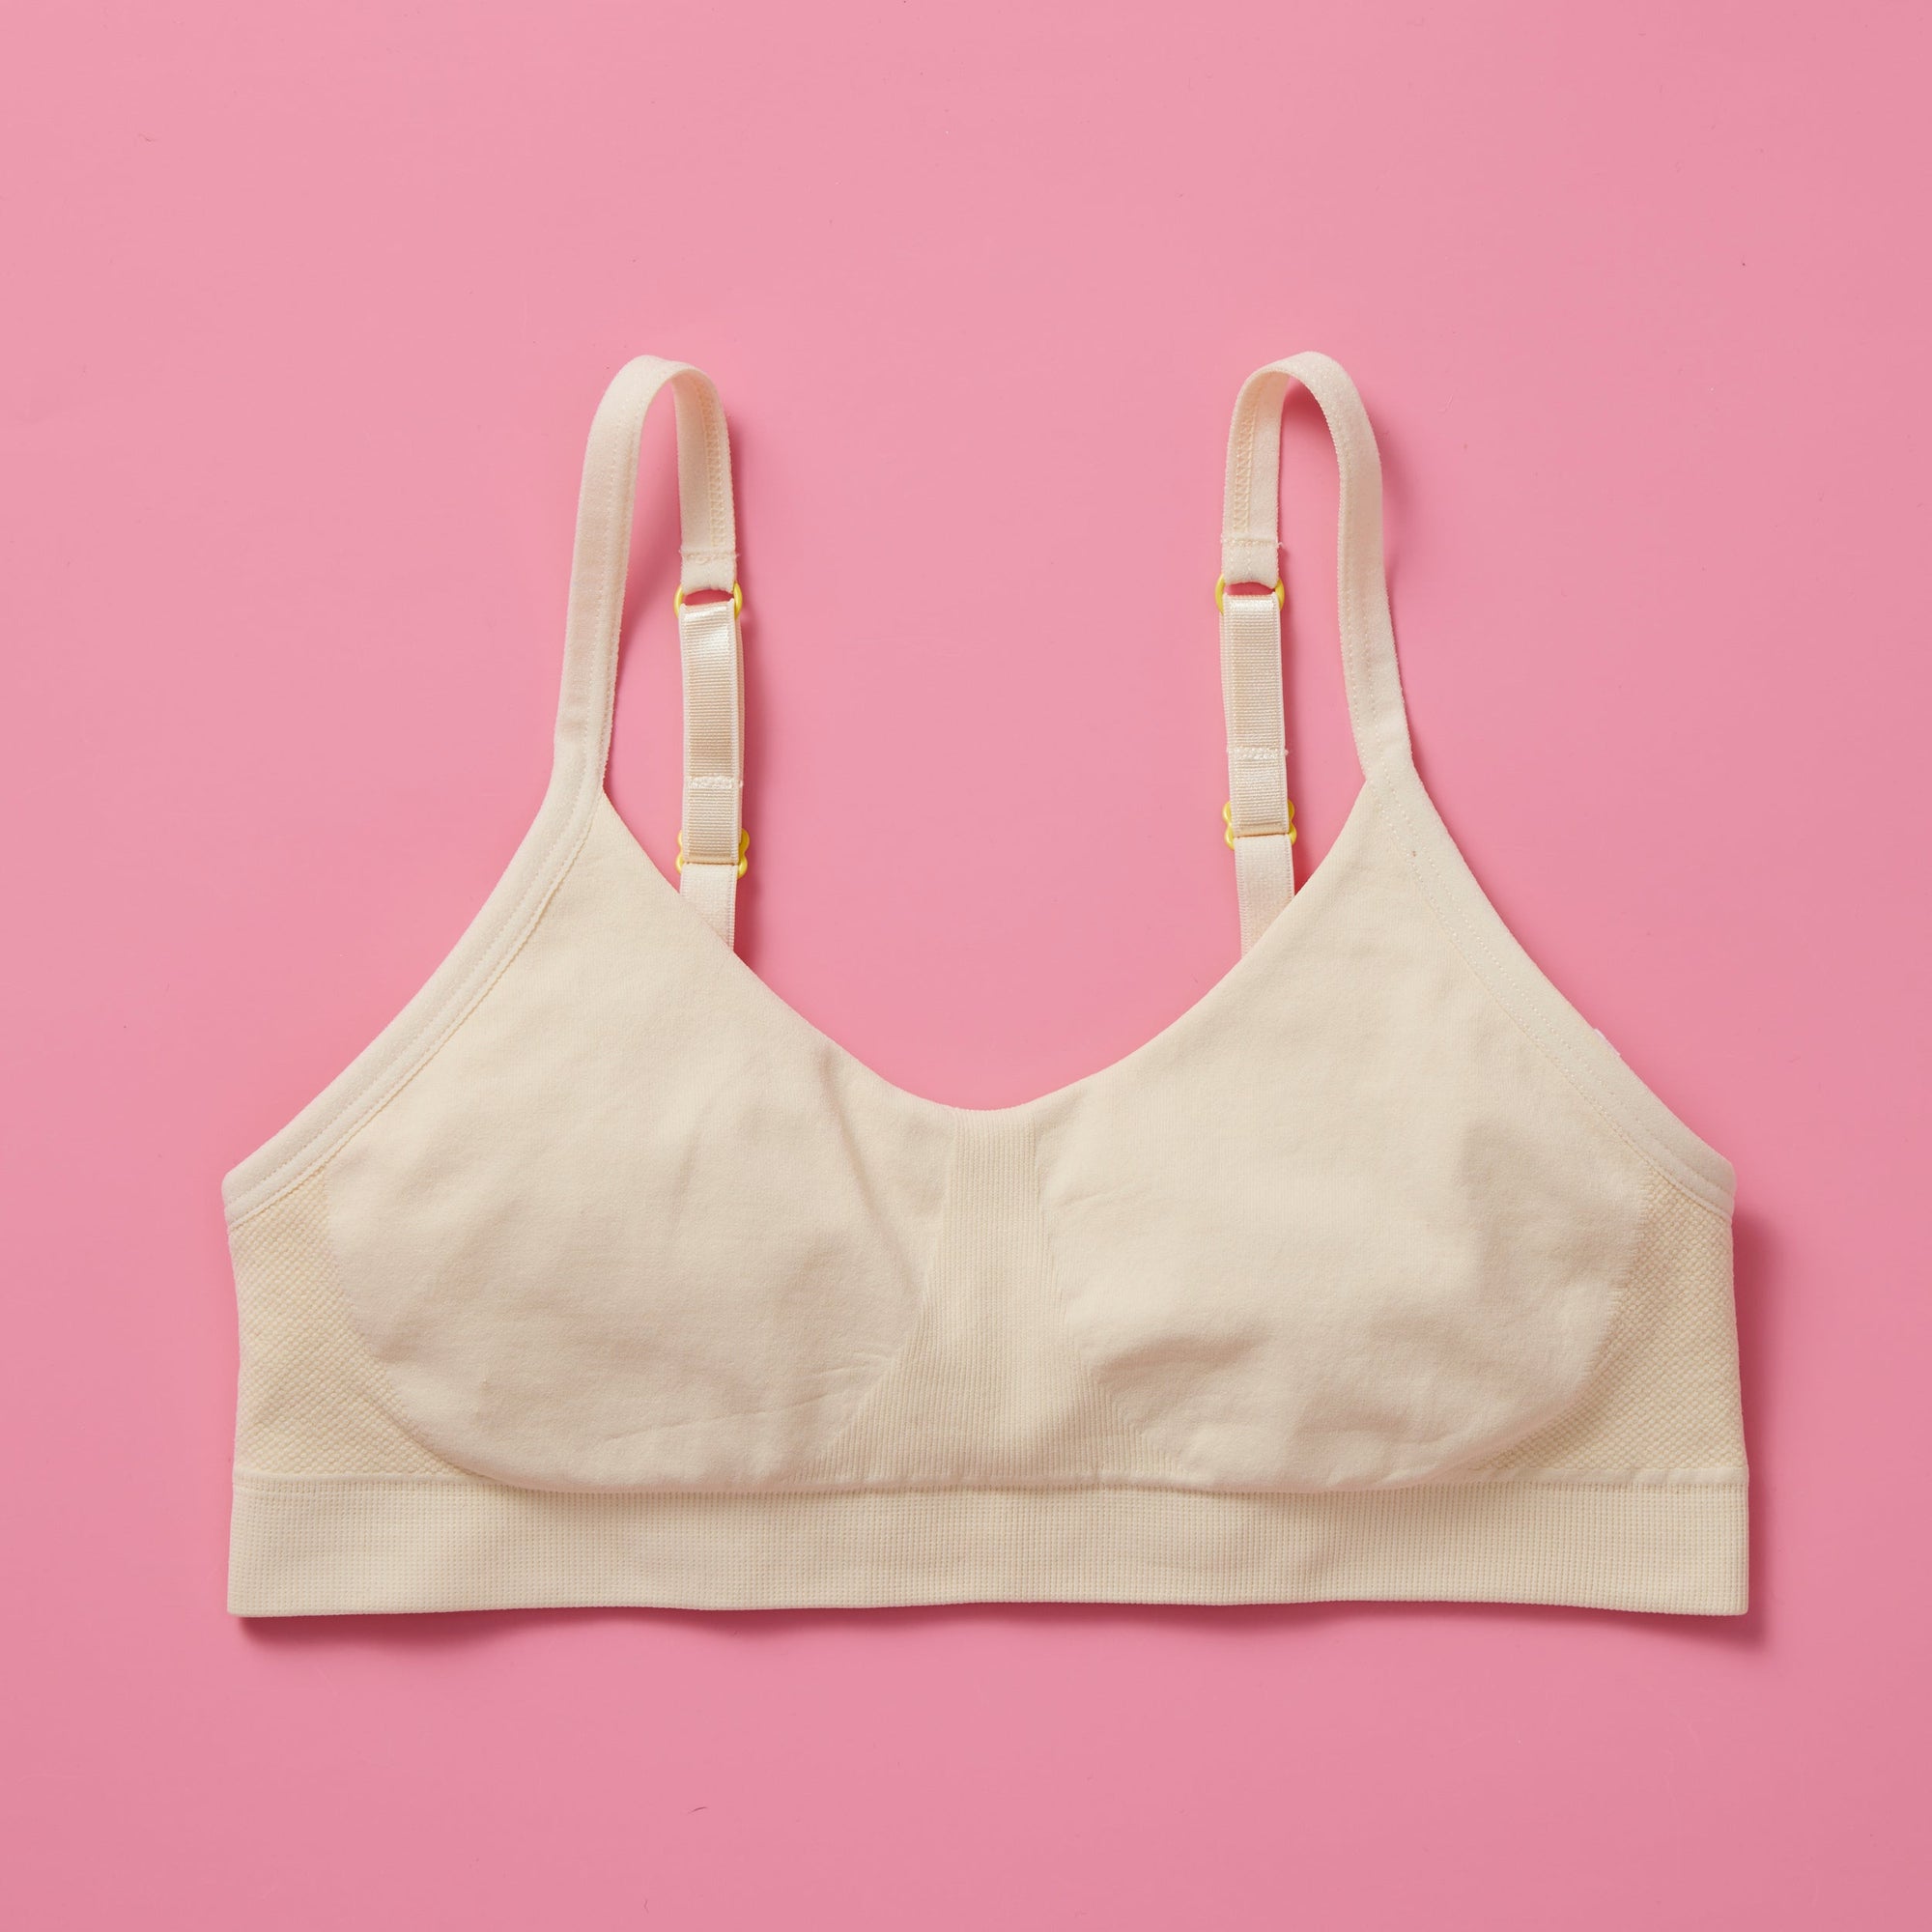 The 11 Best Training Bras for Teens and Tweens of 2023